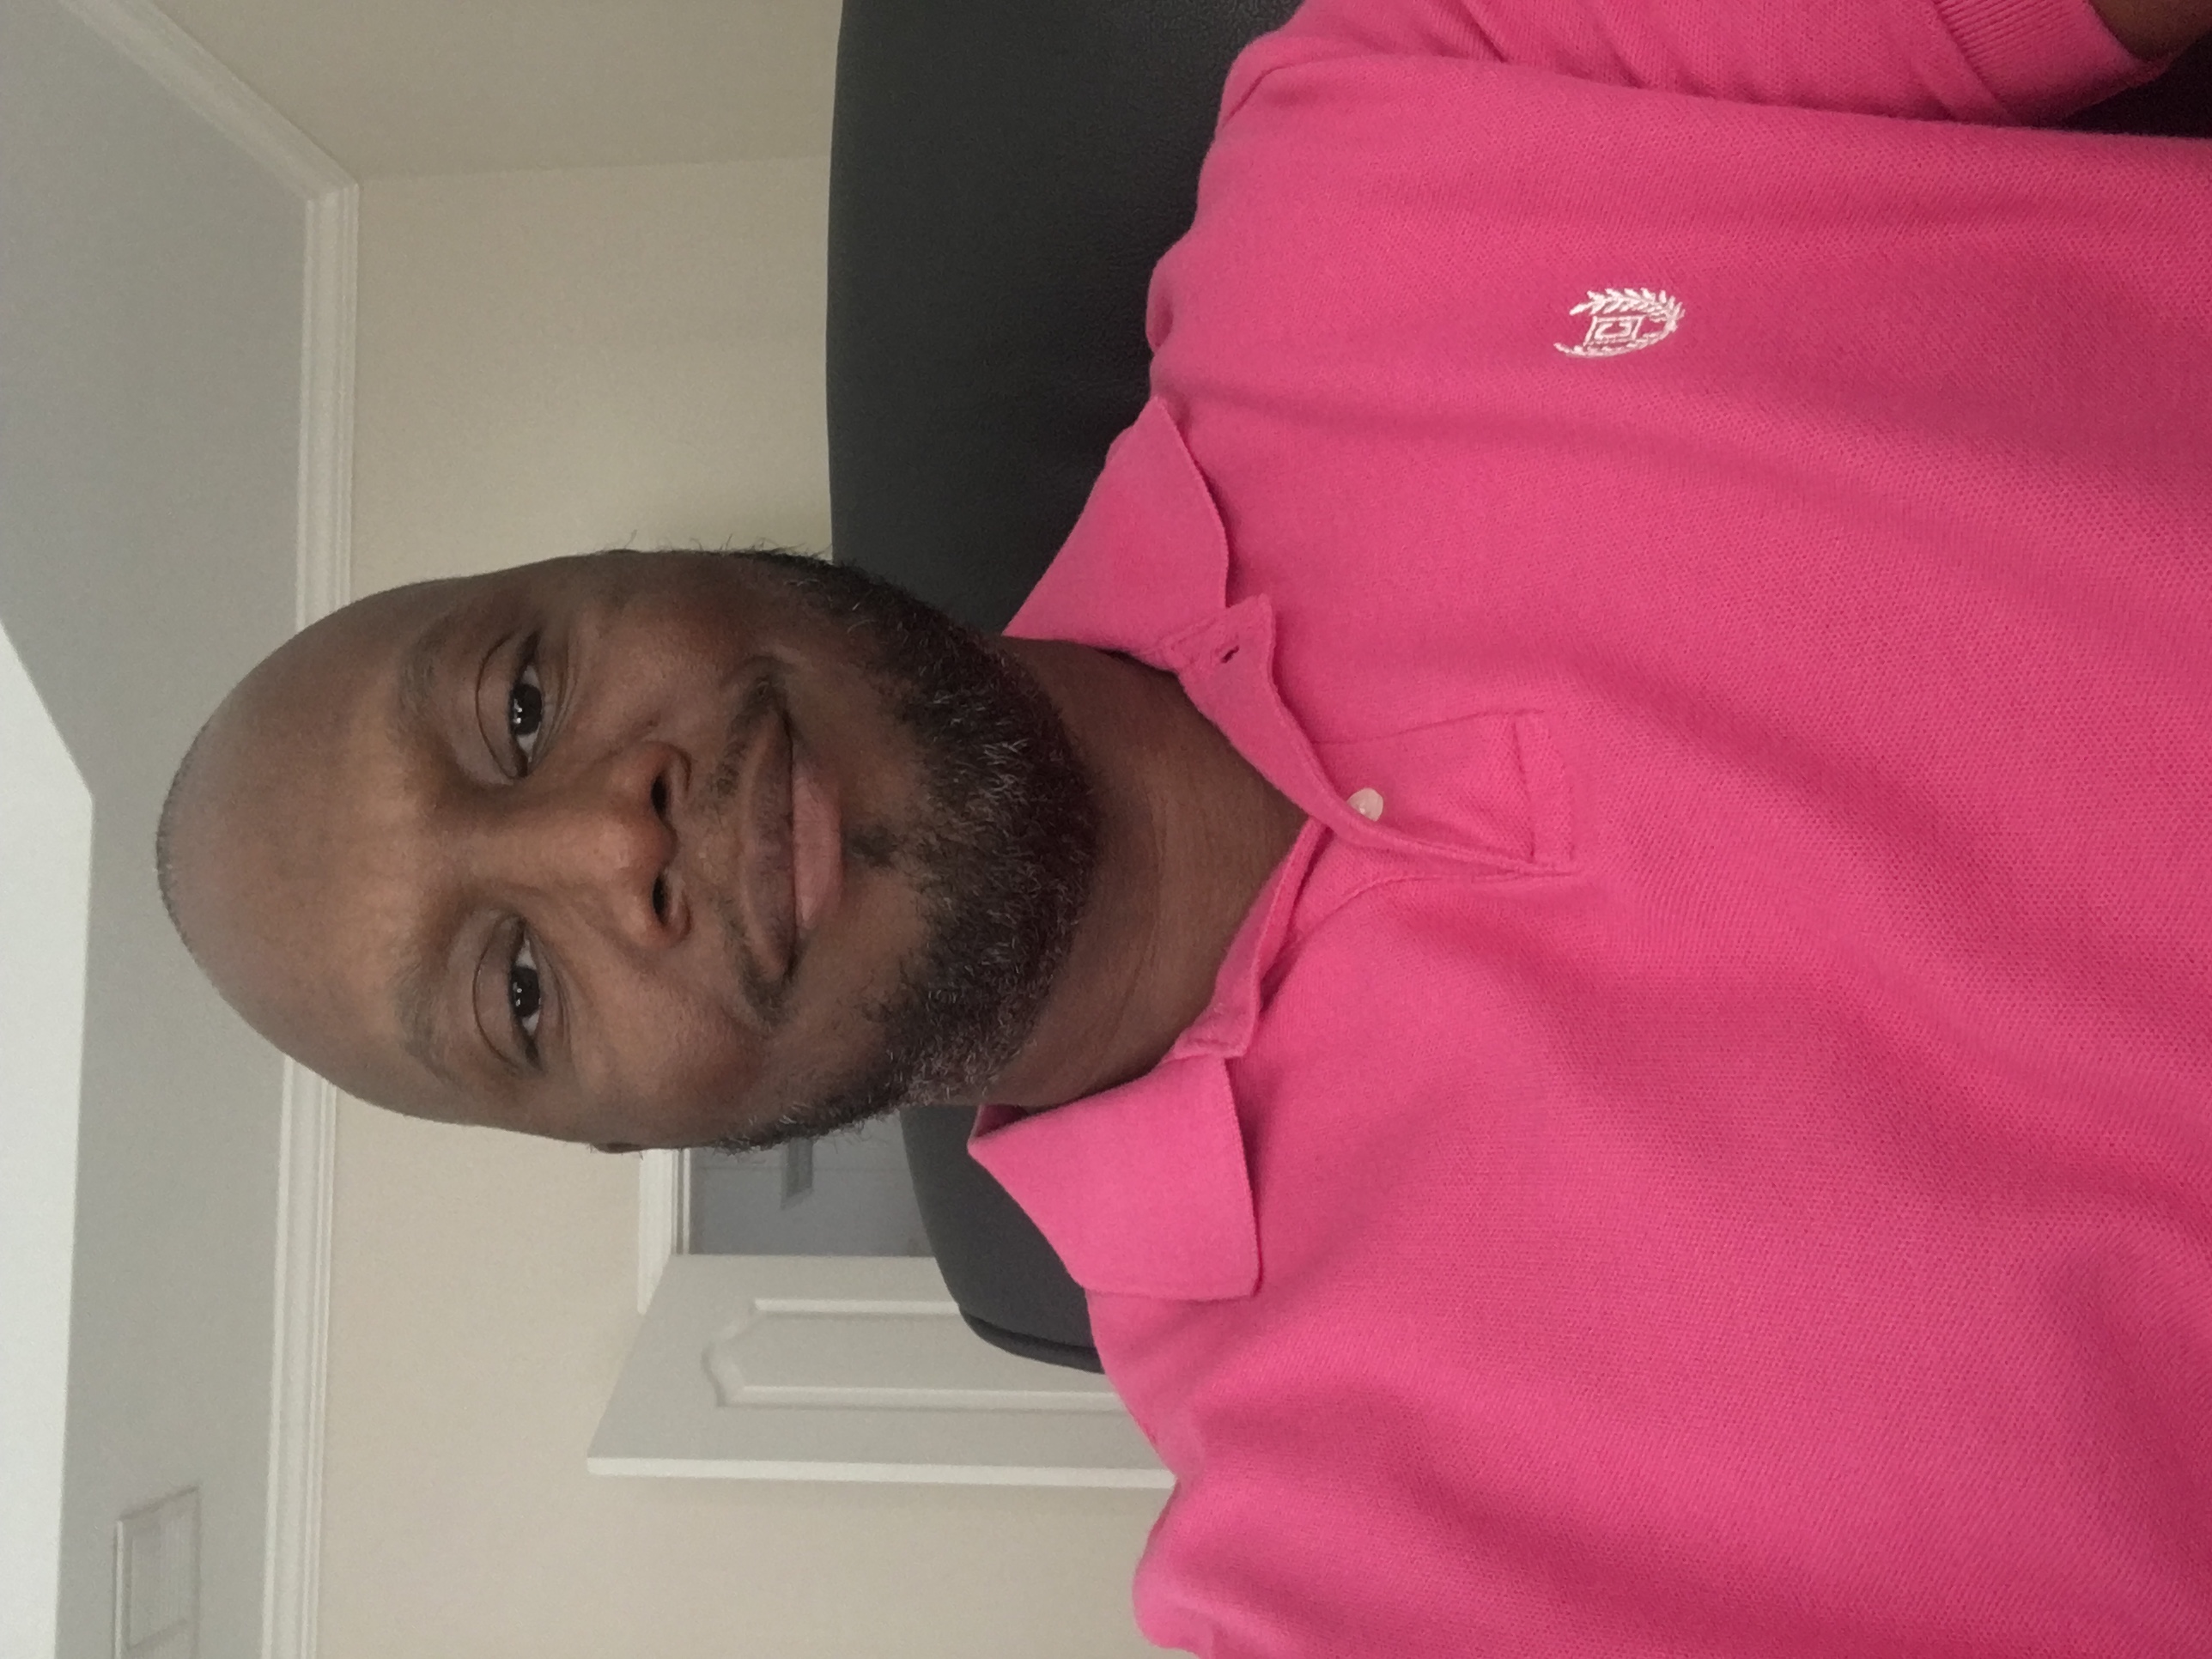 "I have 2 aunts that are breast cancer survivors."-Antonio Campbell,Project Coordinator in Renewable Development, Georgia Power